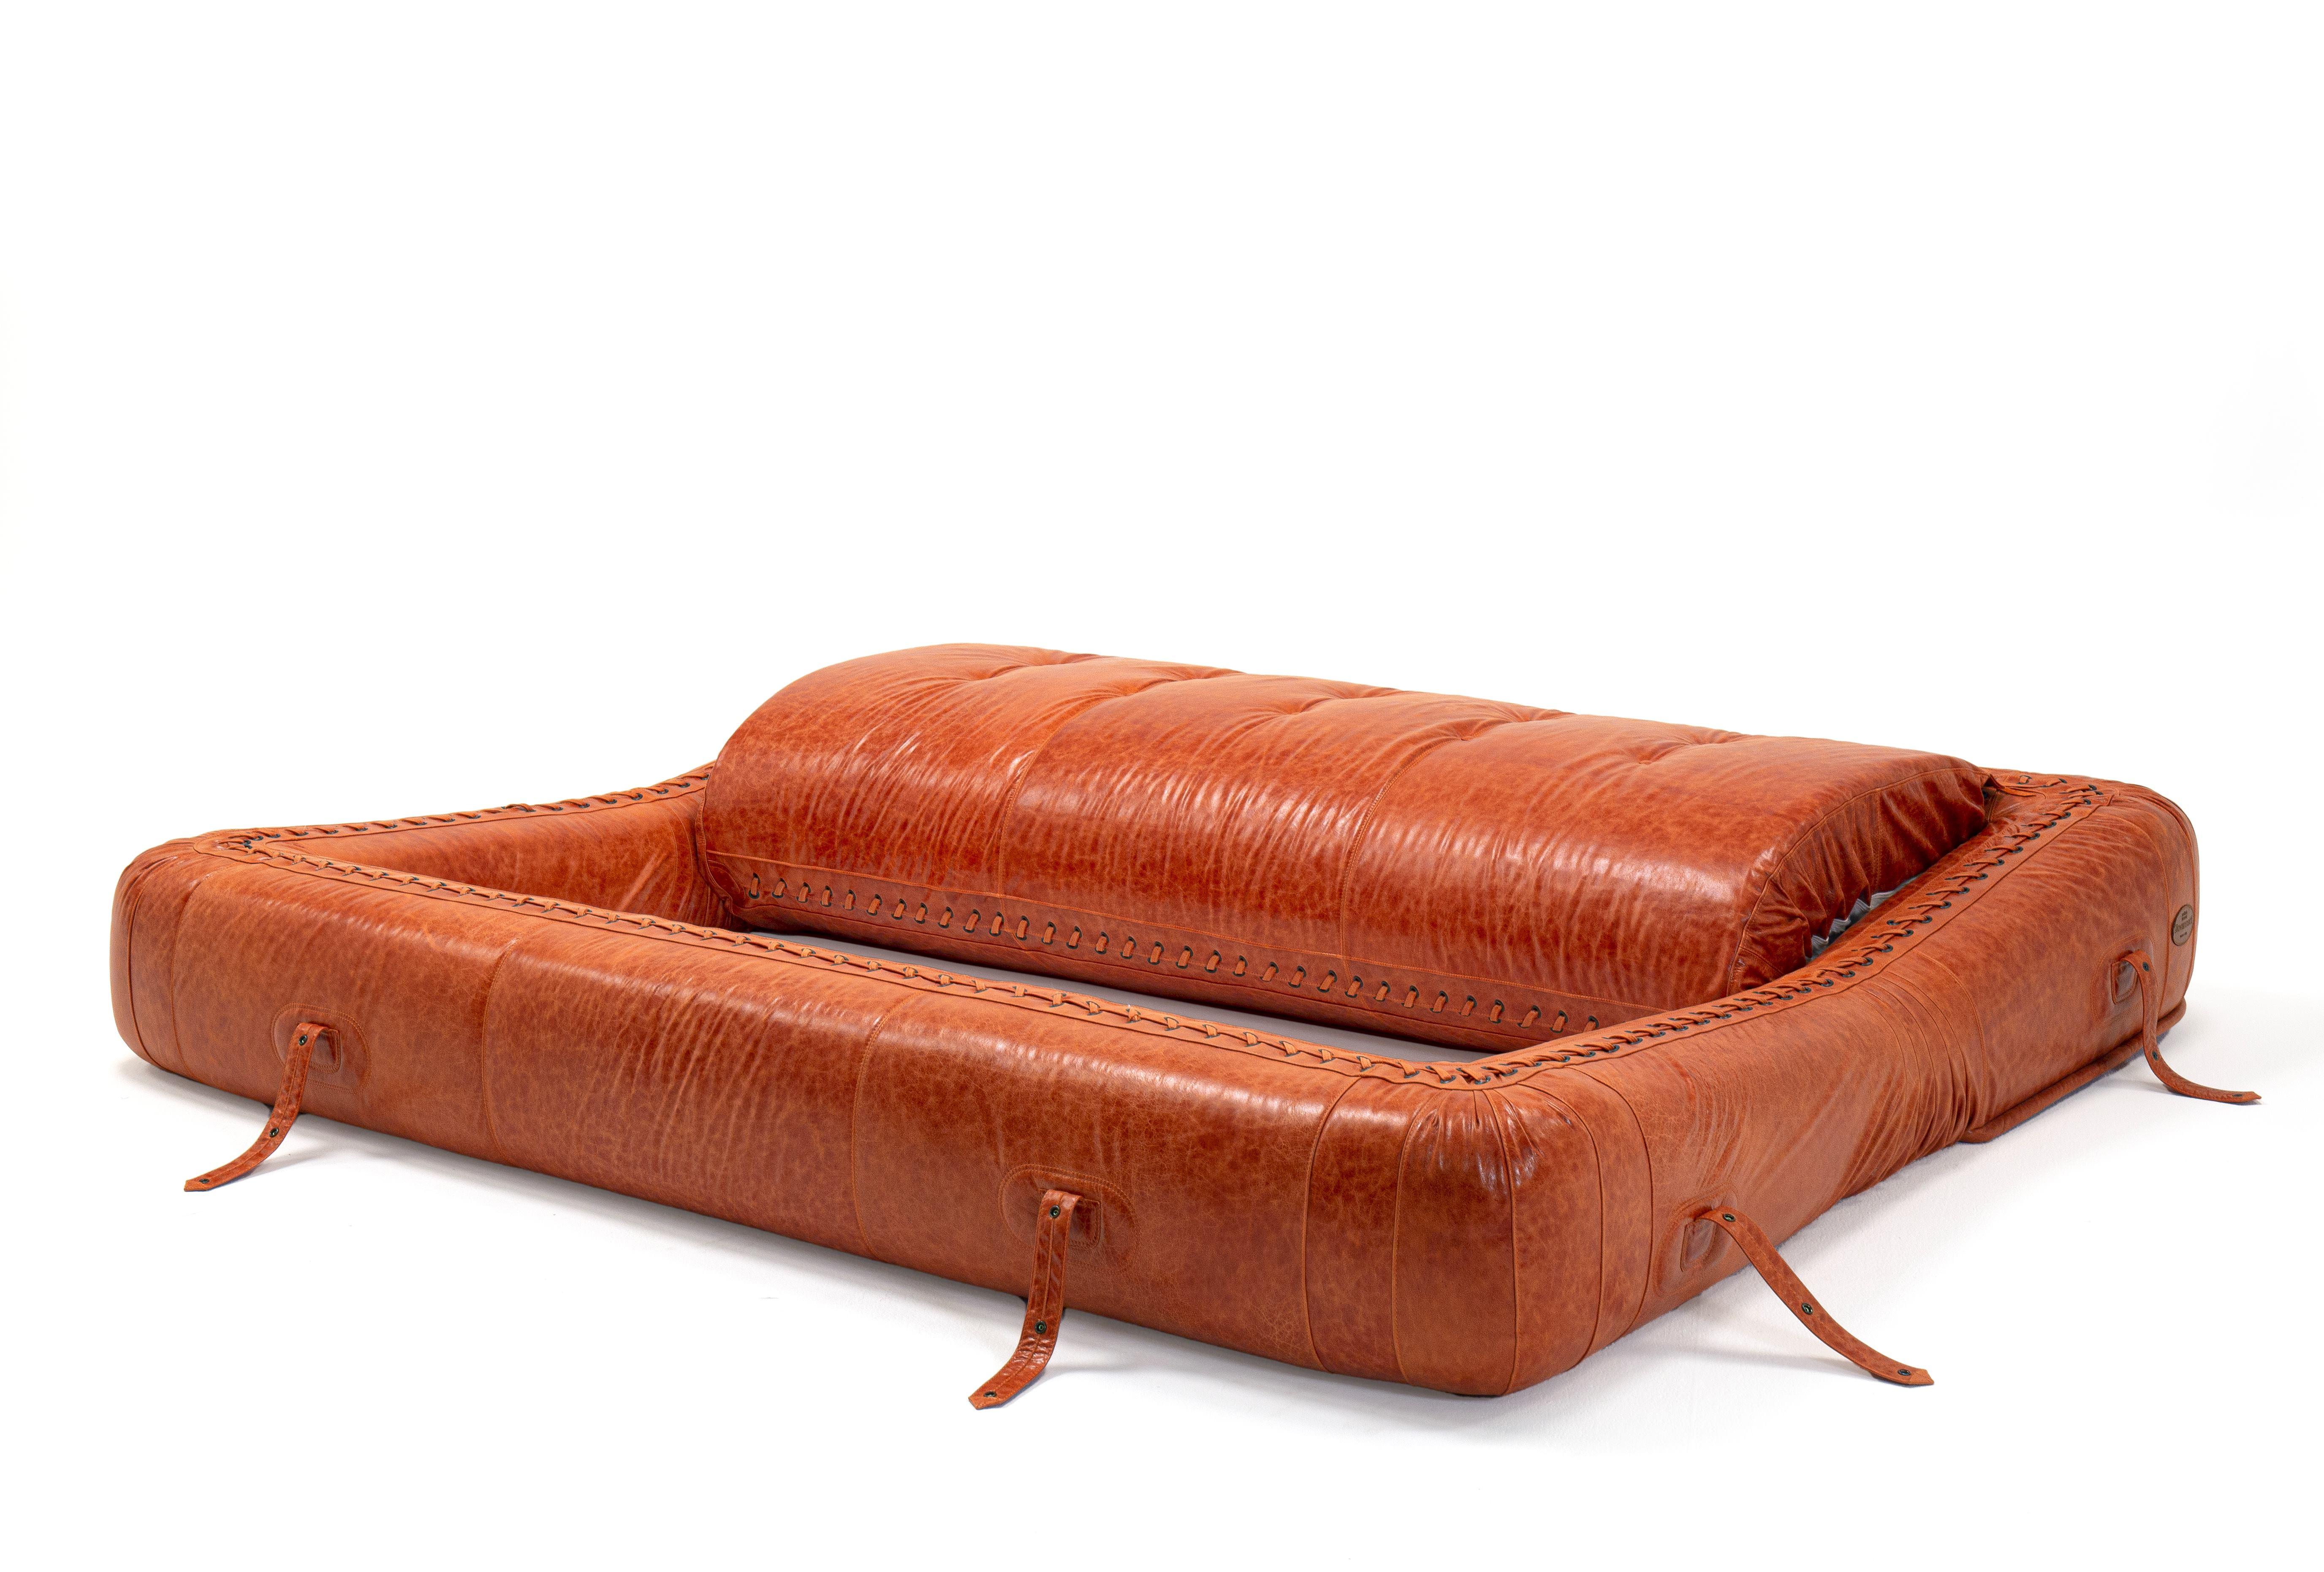 The bed-sofa, designed by Alessandro Becchi together with the Giovannetti staff has recently celebrated its 50 years.
Its history is full of important events and participations. A piece considered a “Classic” of Italian Design, interpreting all-over